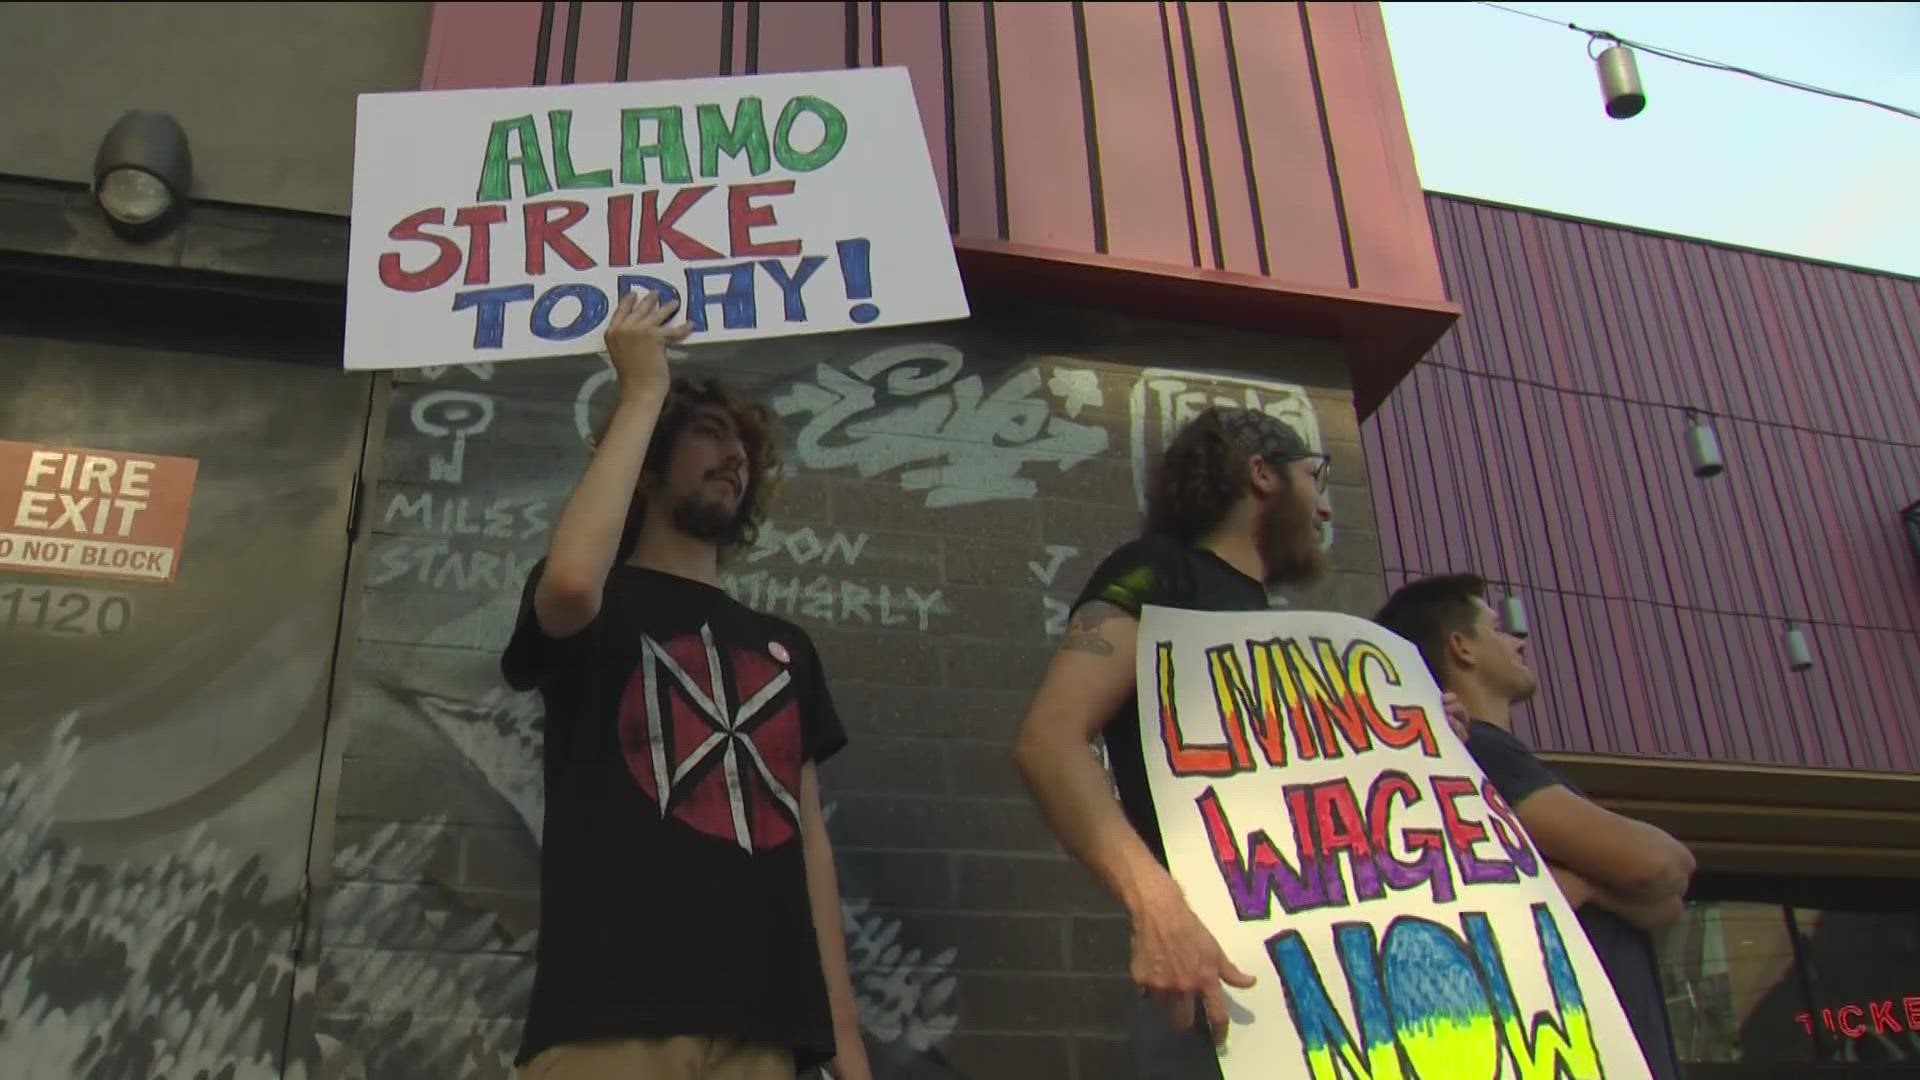 Workers at an Alamo Drafthouse in South Austin are accusing the company of union-busting. They say a worker was fired after trying to organize and push for more pay.